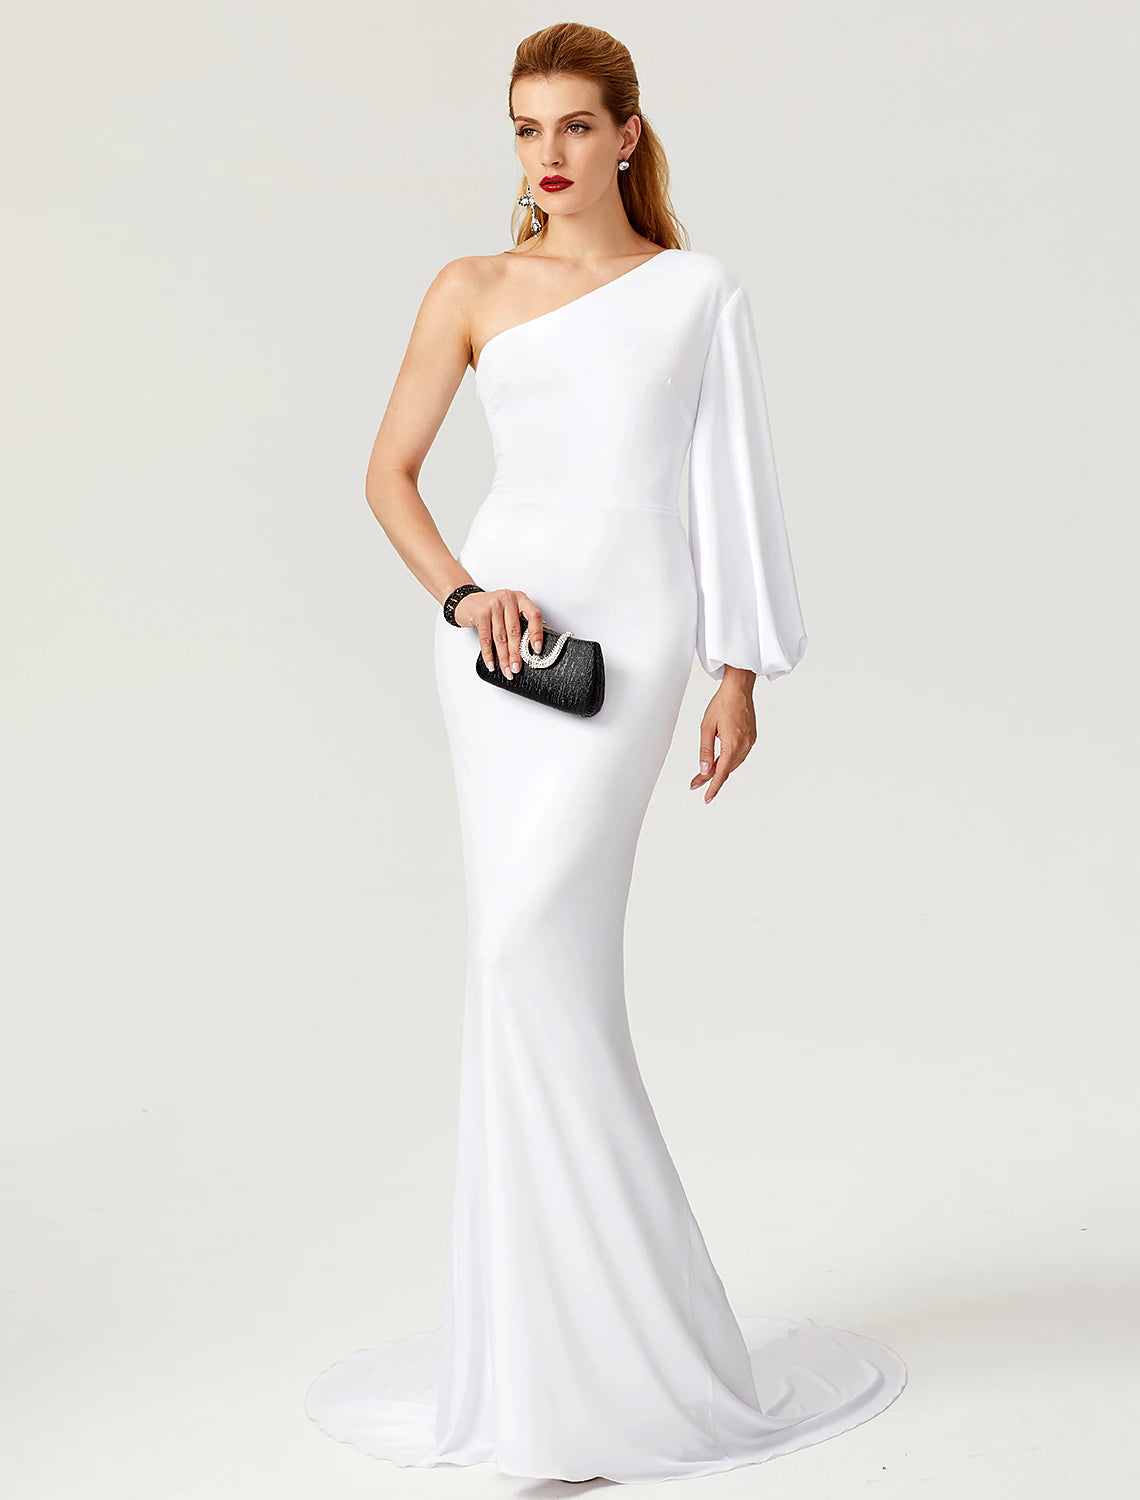 Wholesa Mermaid / Trumpet Celebrity Style Dress Engagement Formal Evening Court Train Long Sleeve One Shoulder Jersey with Pleats